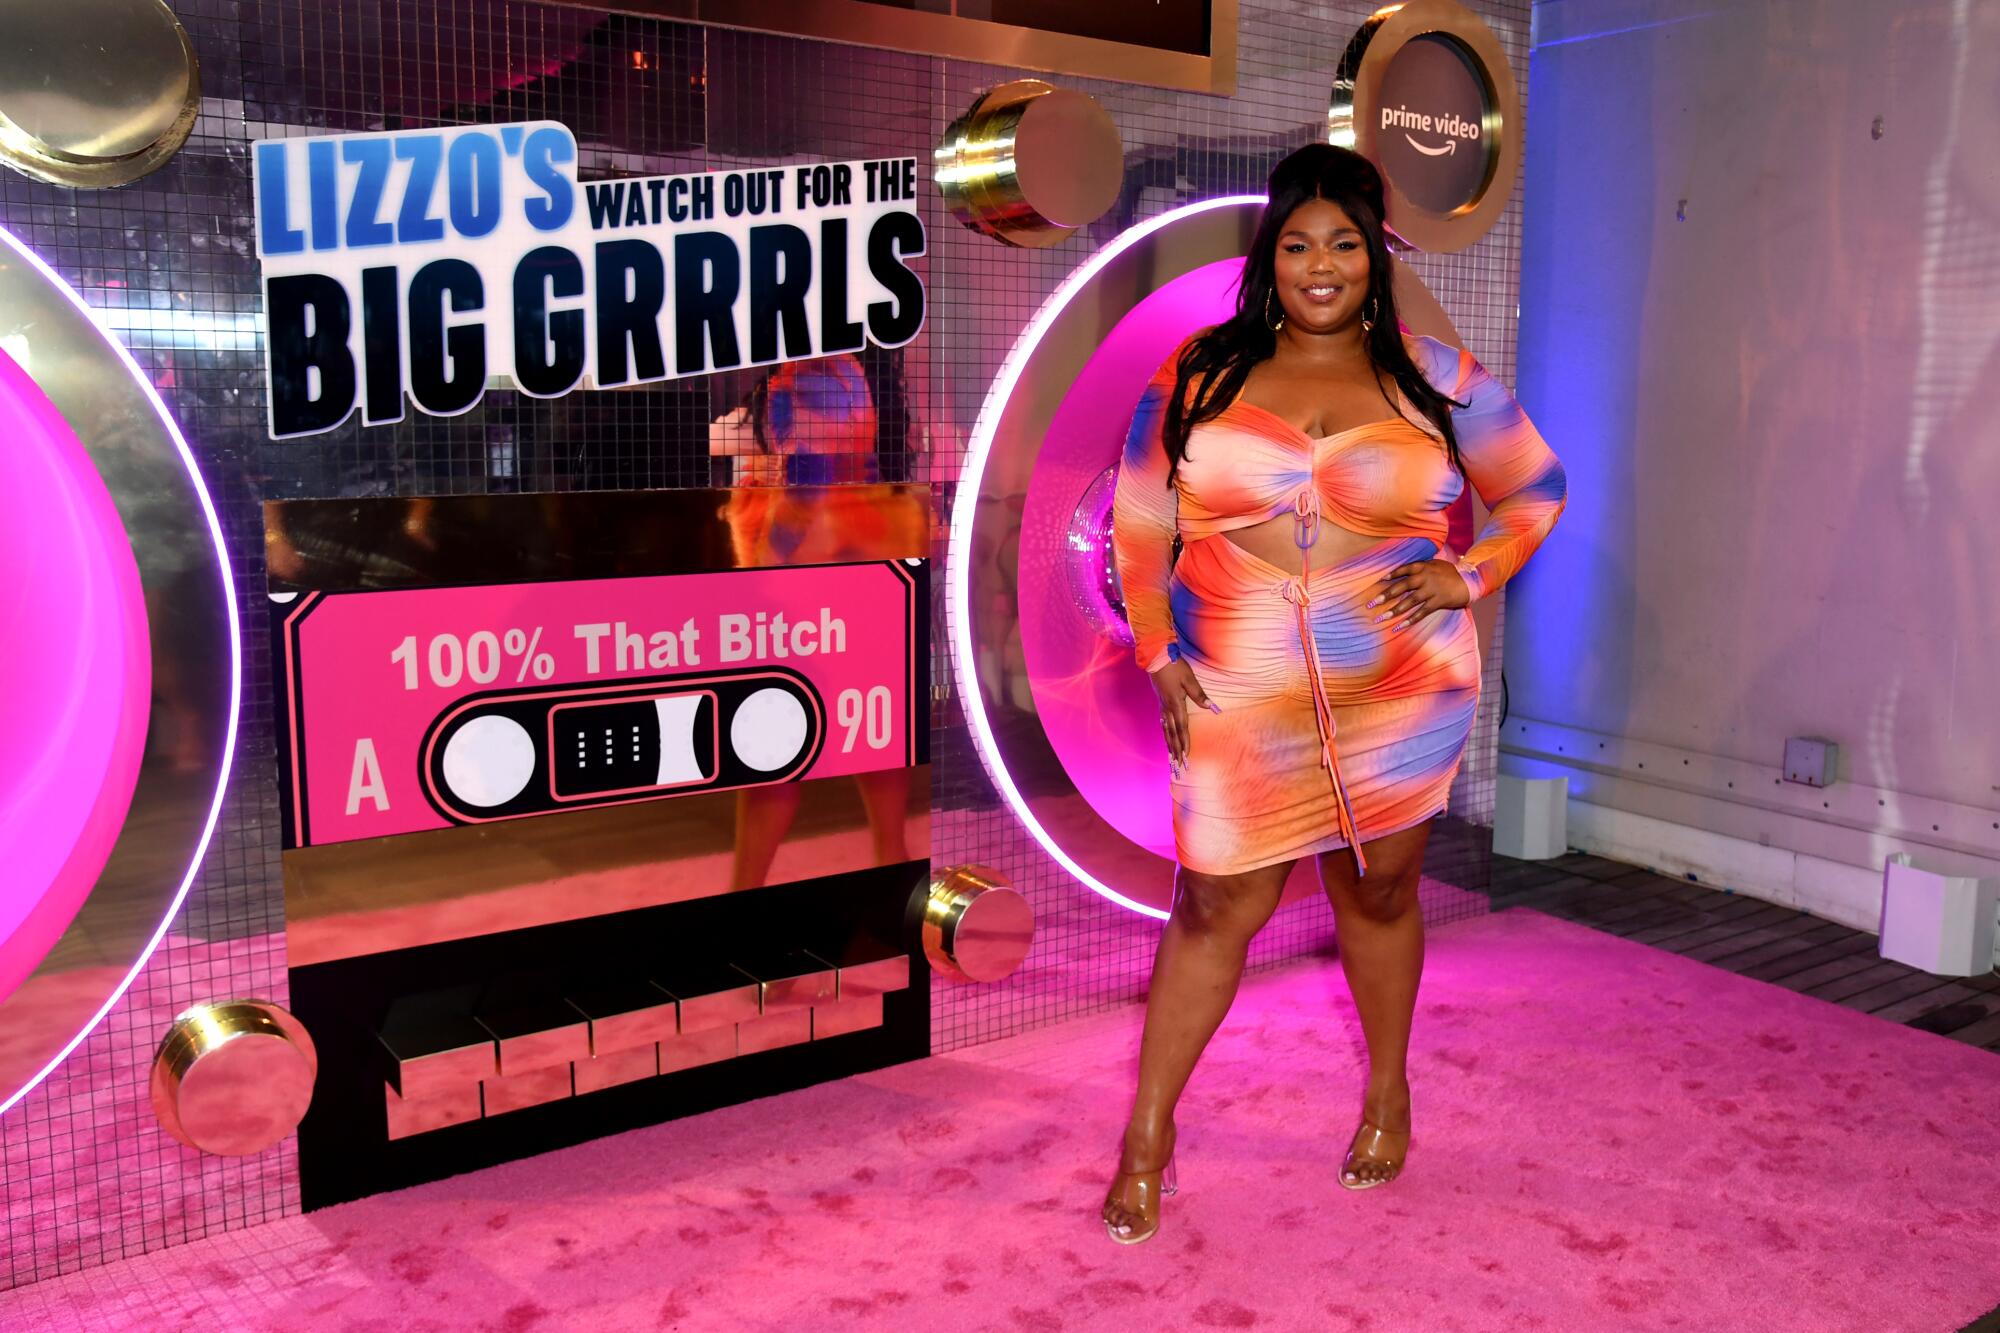 Lizzo stands in front of an advertisement for her TV show